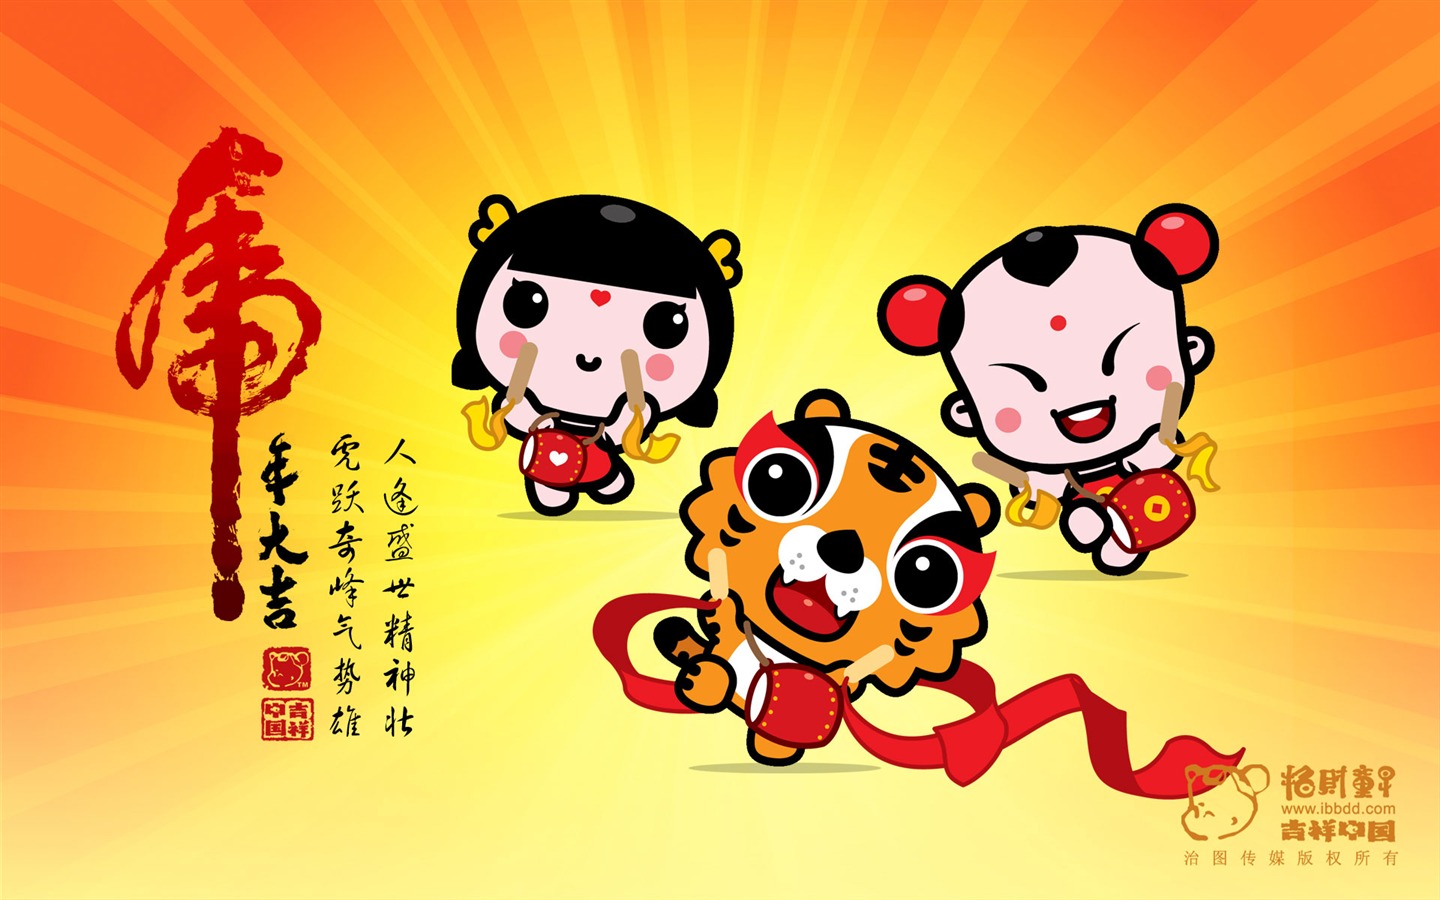 Lucky Boy Year of the Tiger Wallpaper #1 - 1440x900